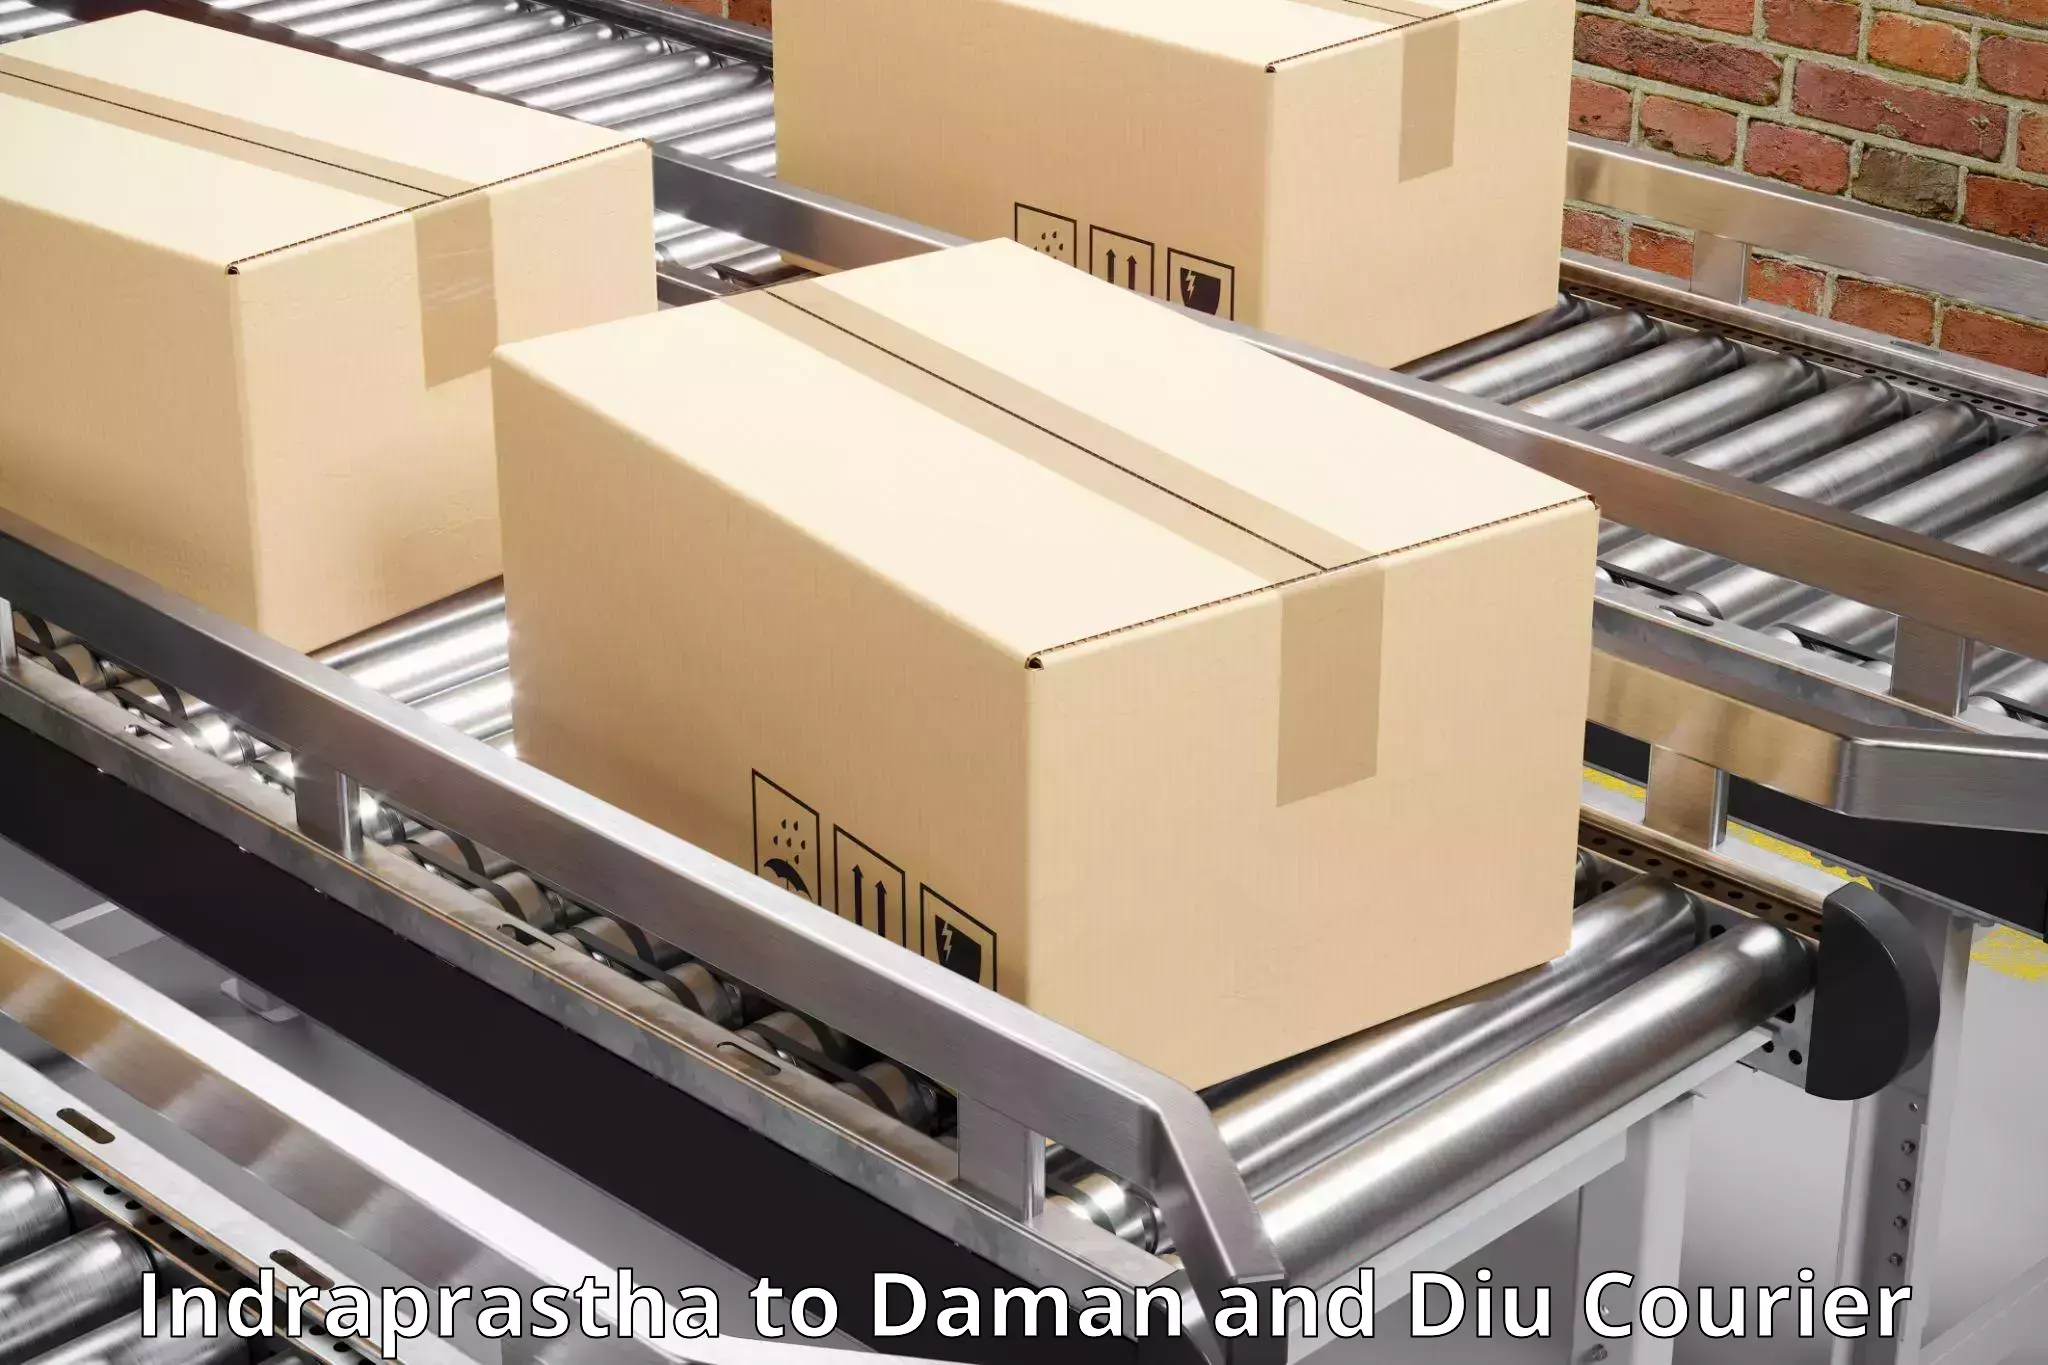 Global courier networks Indraprastha to Daman